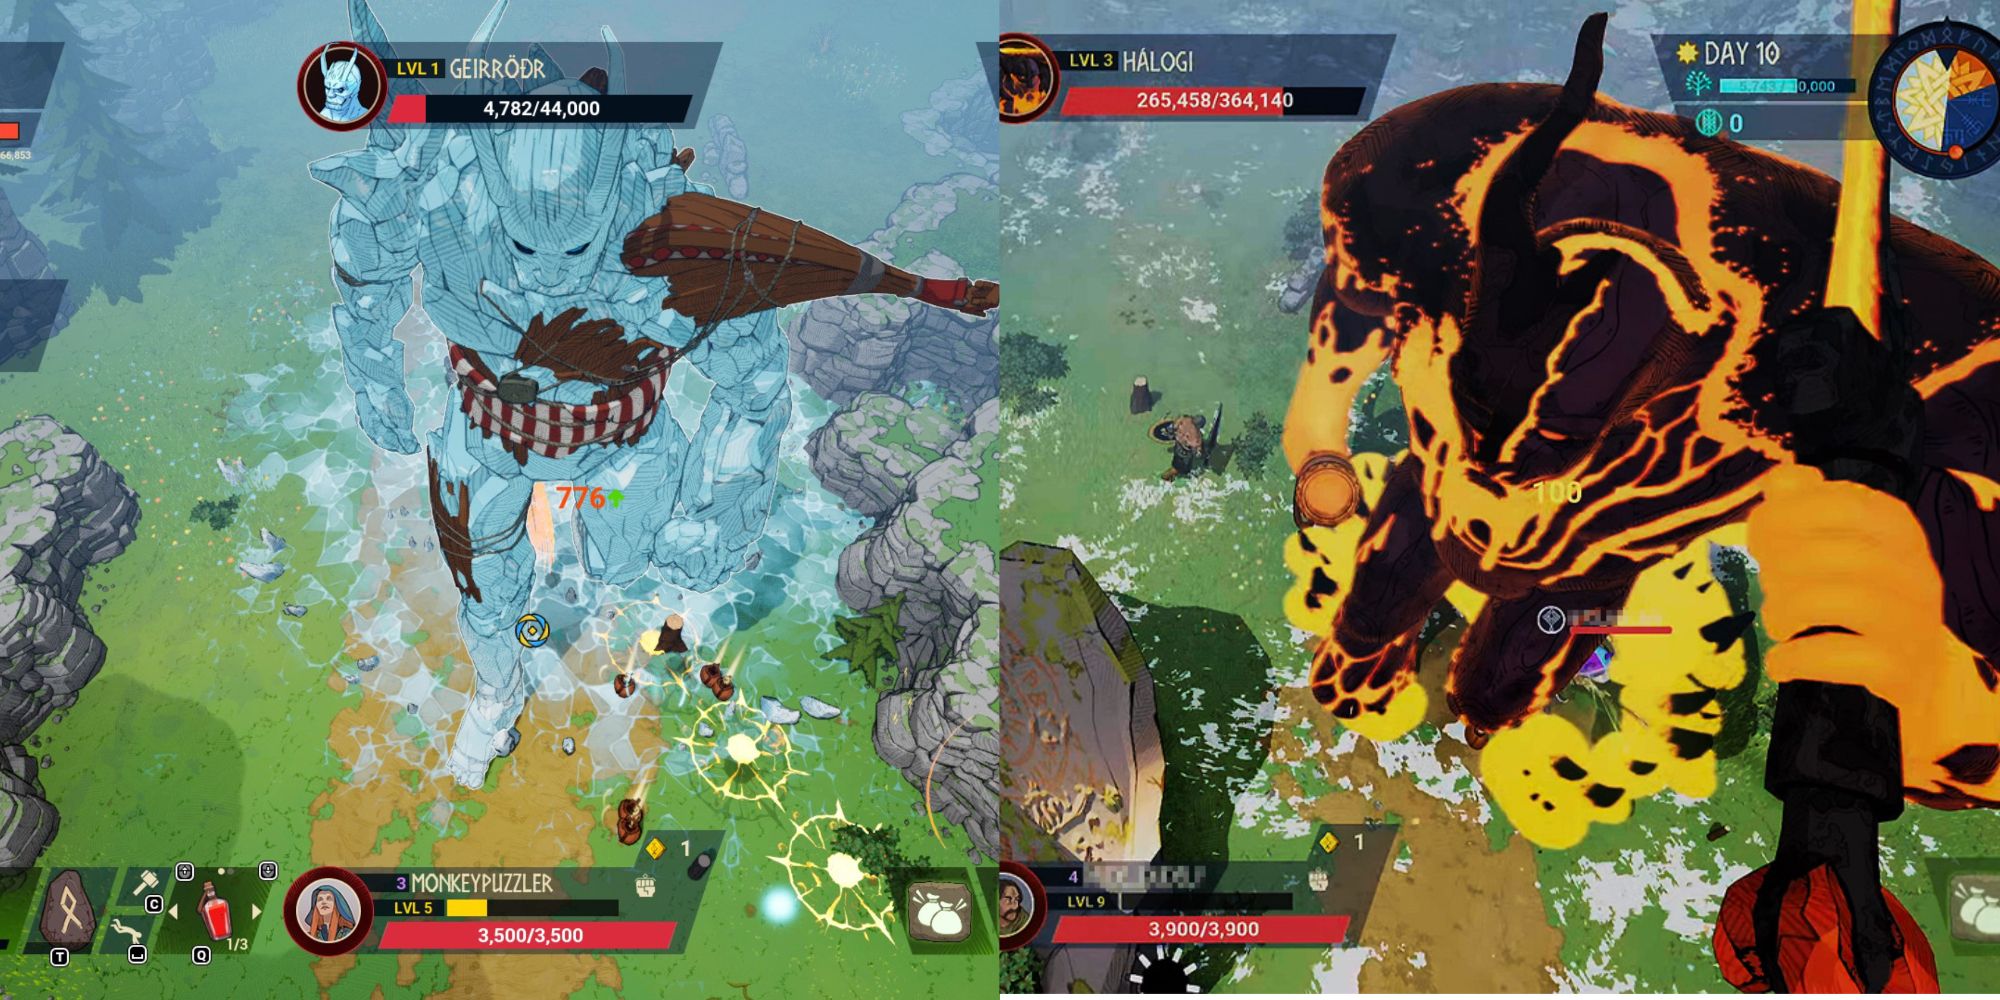 split image of battles with Geirrodr and Halogi in Tribes of Midgard